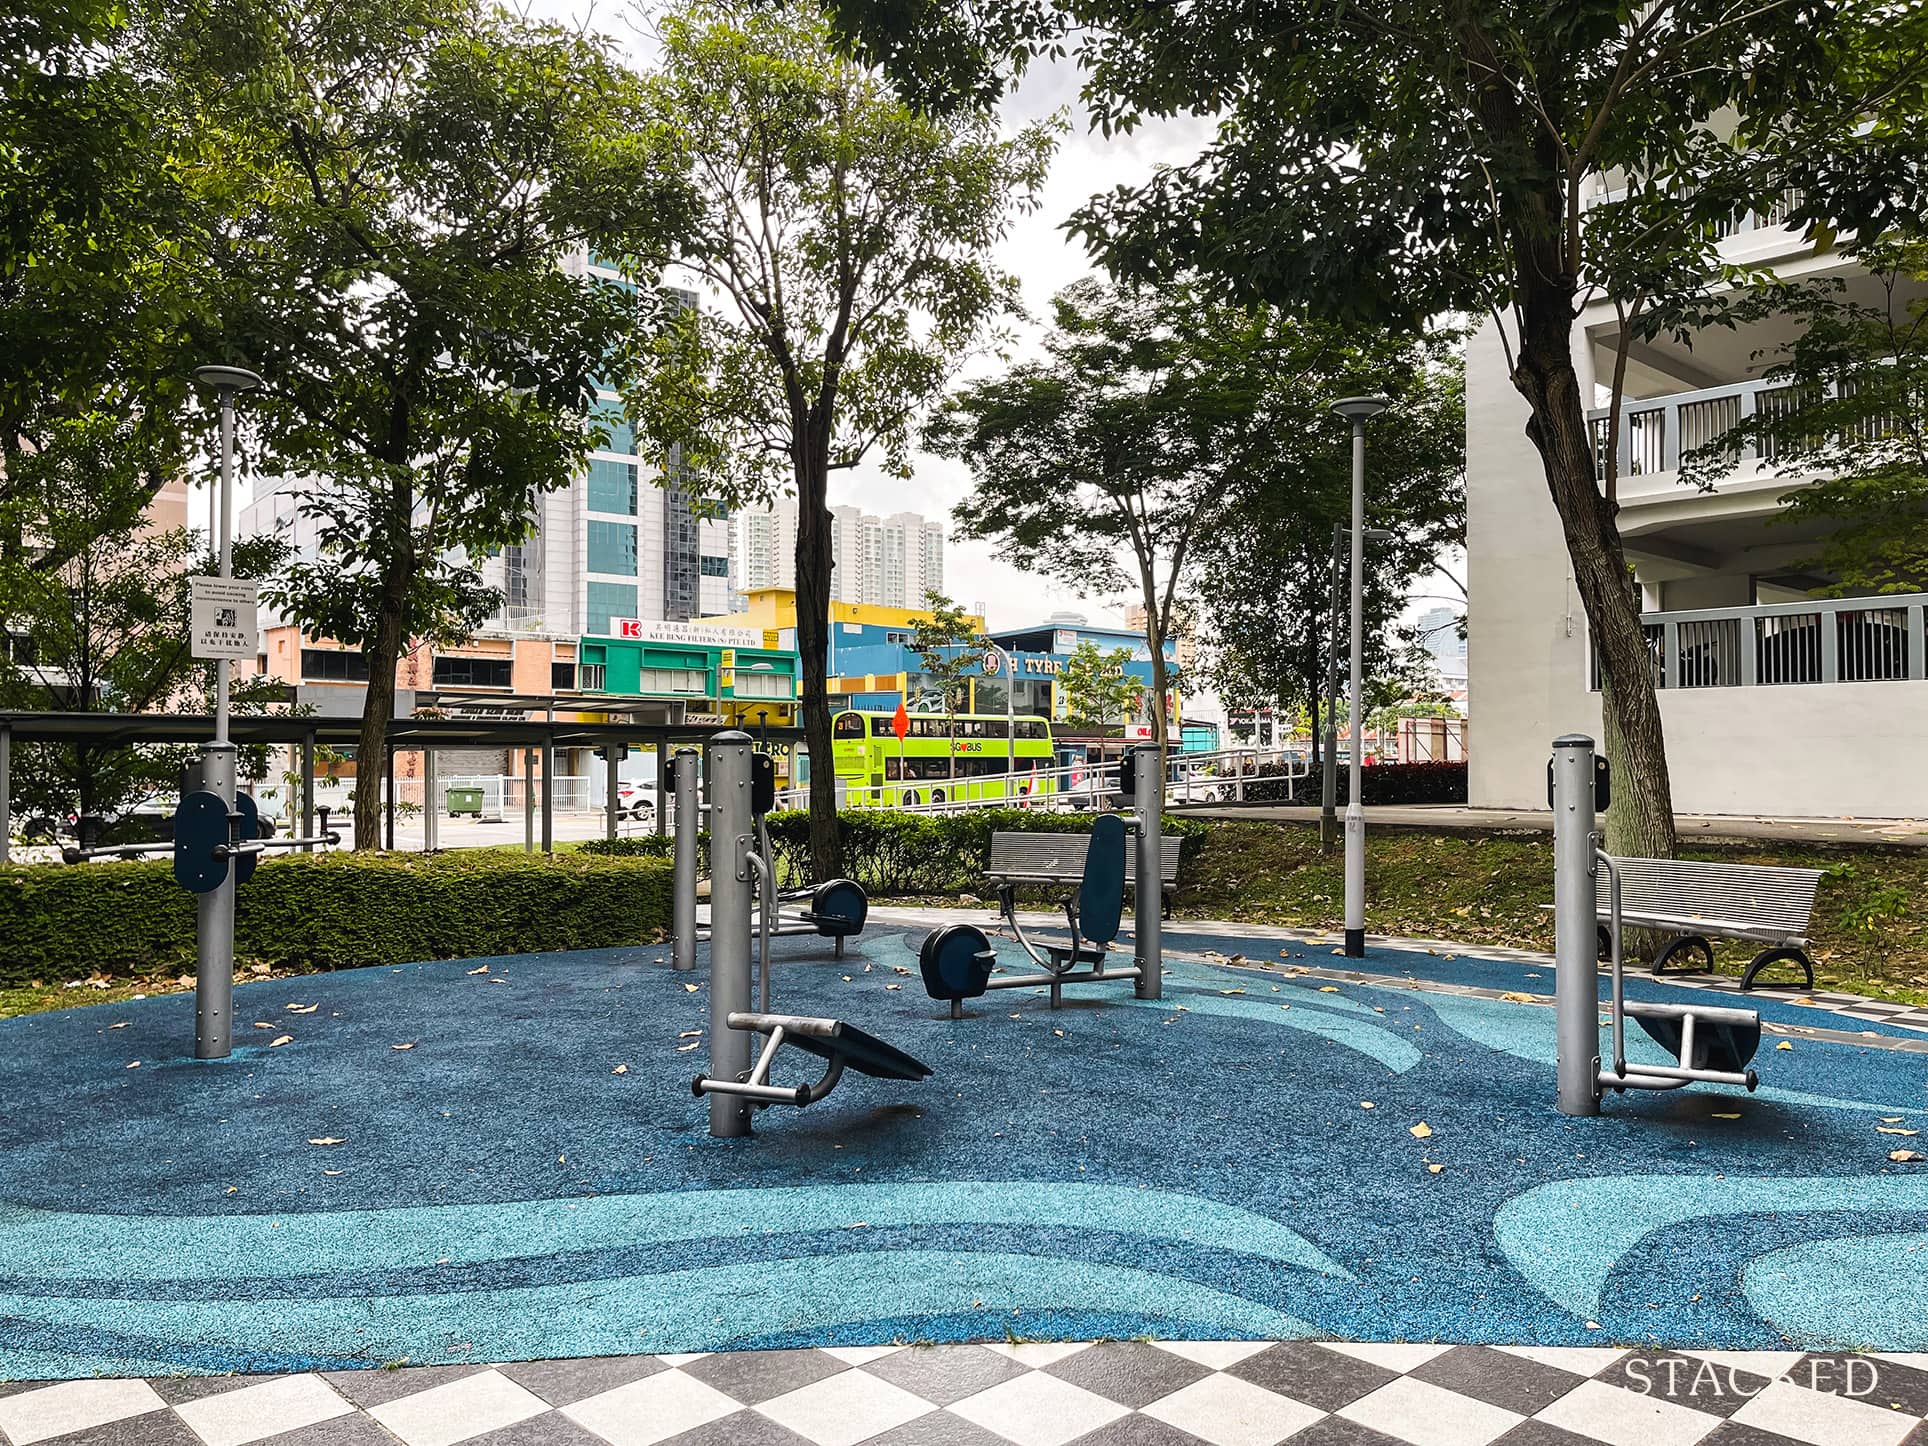 City View @ Boon Keng DBSS fitness station